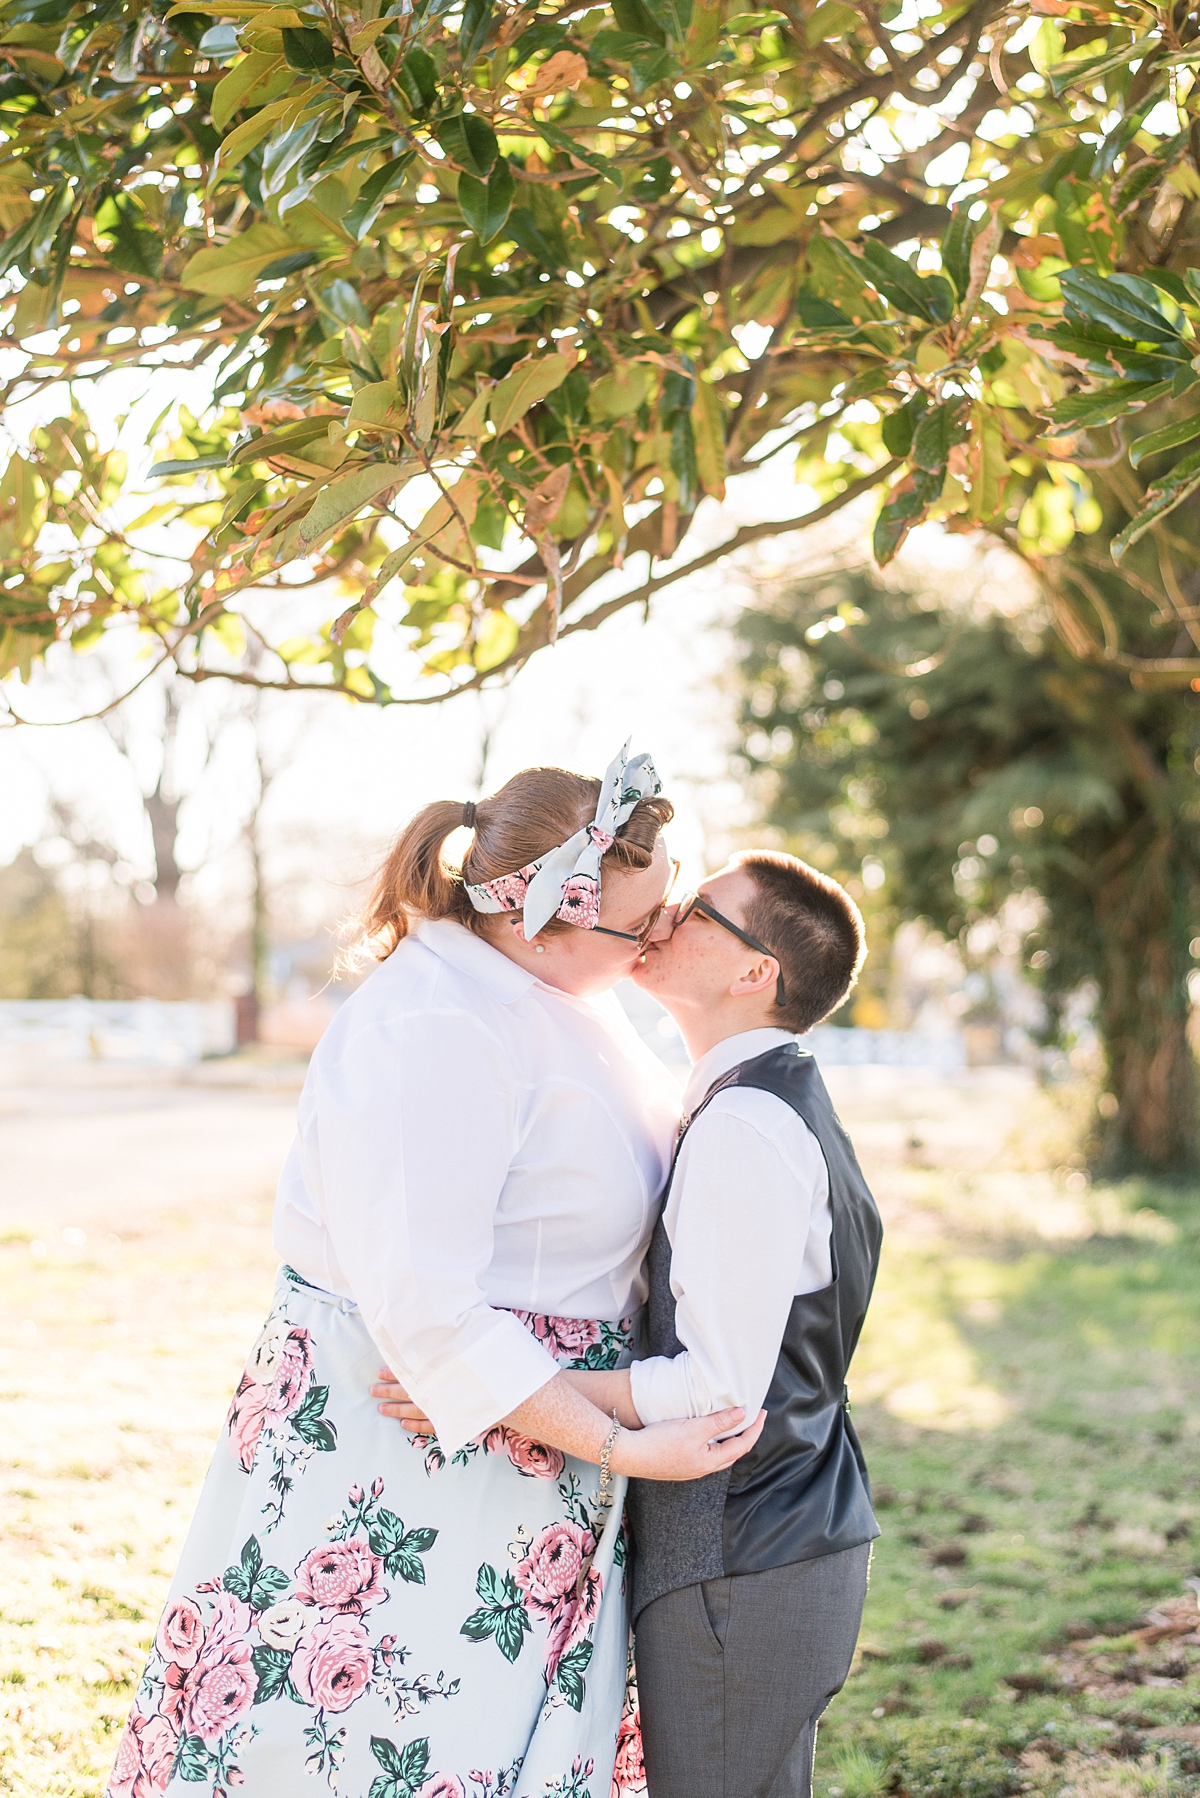 1950's Styled Engagement Session in Virginia Beach by Petersburg Wedding Photographer, Kailey Brianne Photography. 